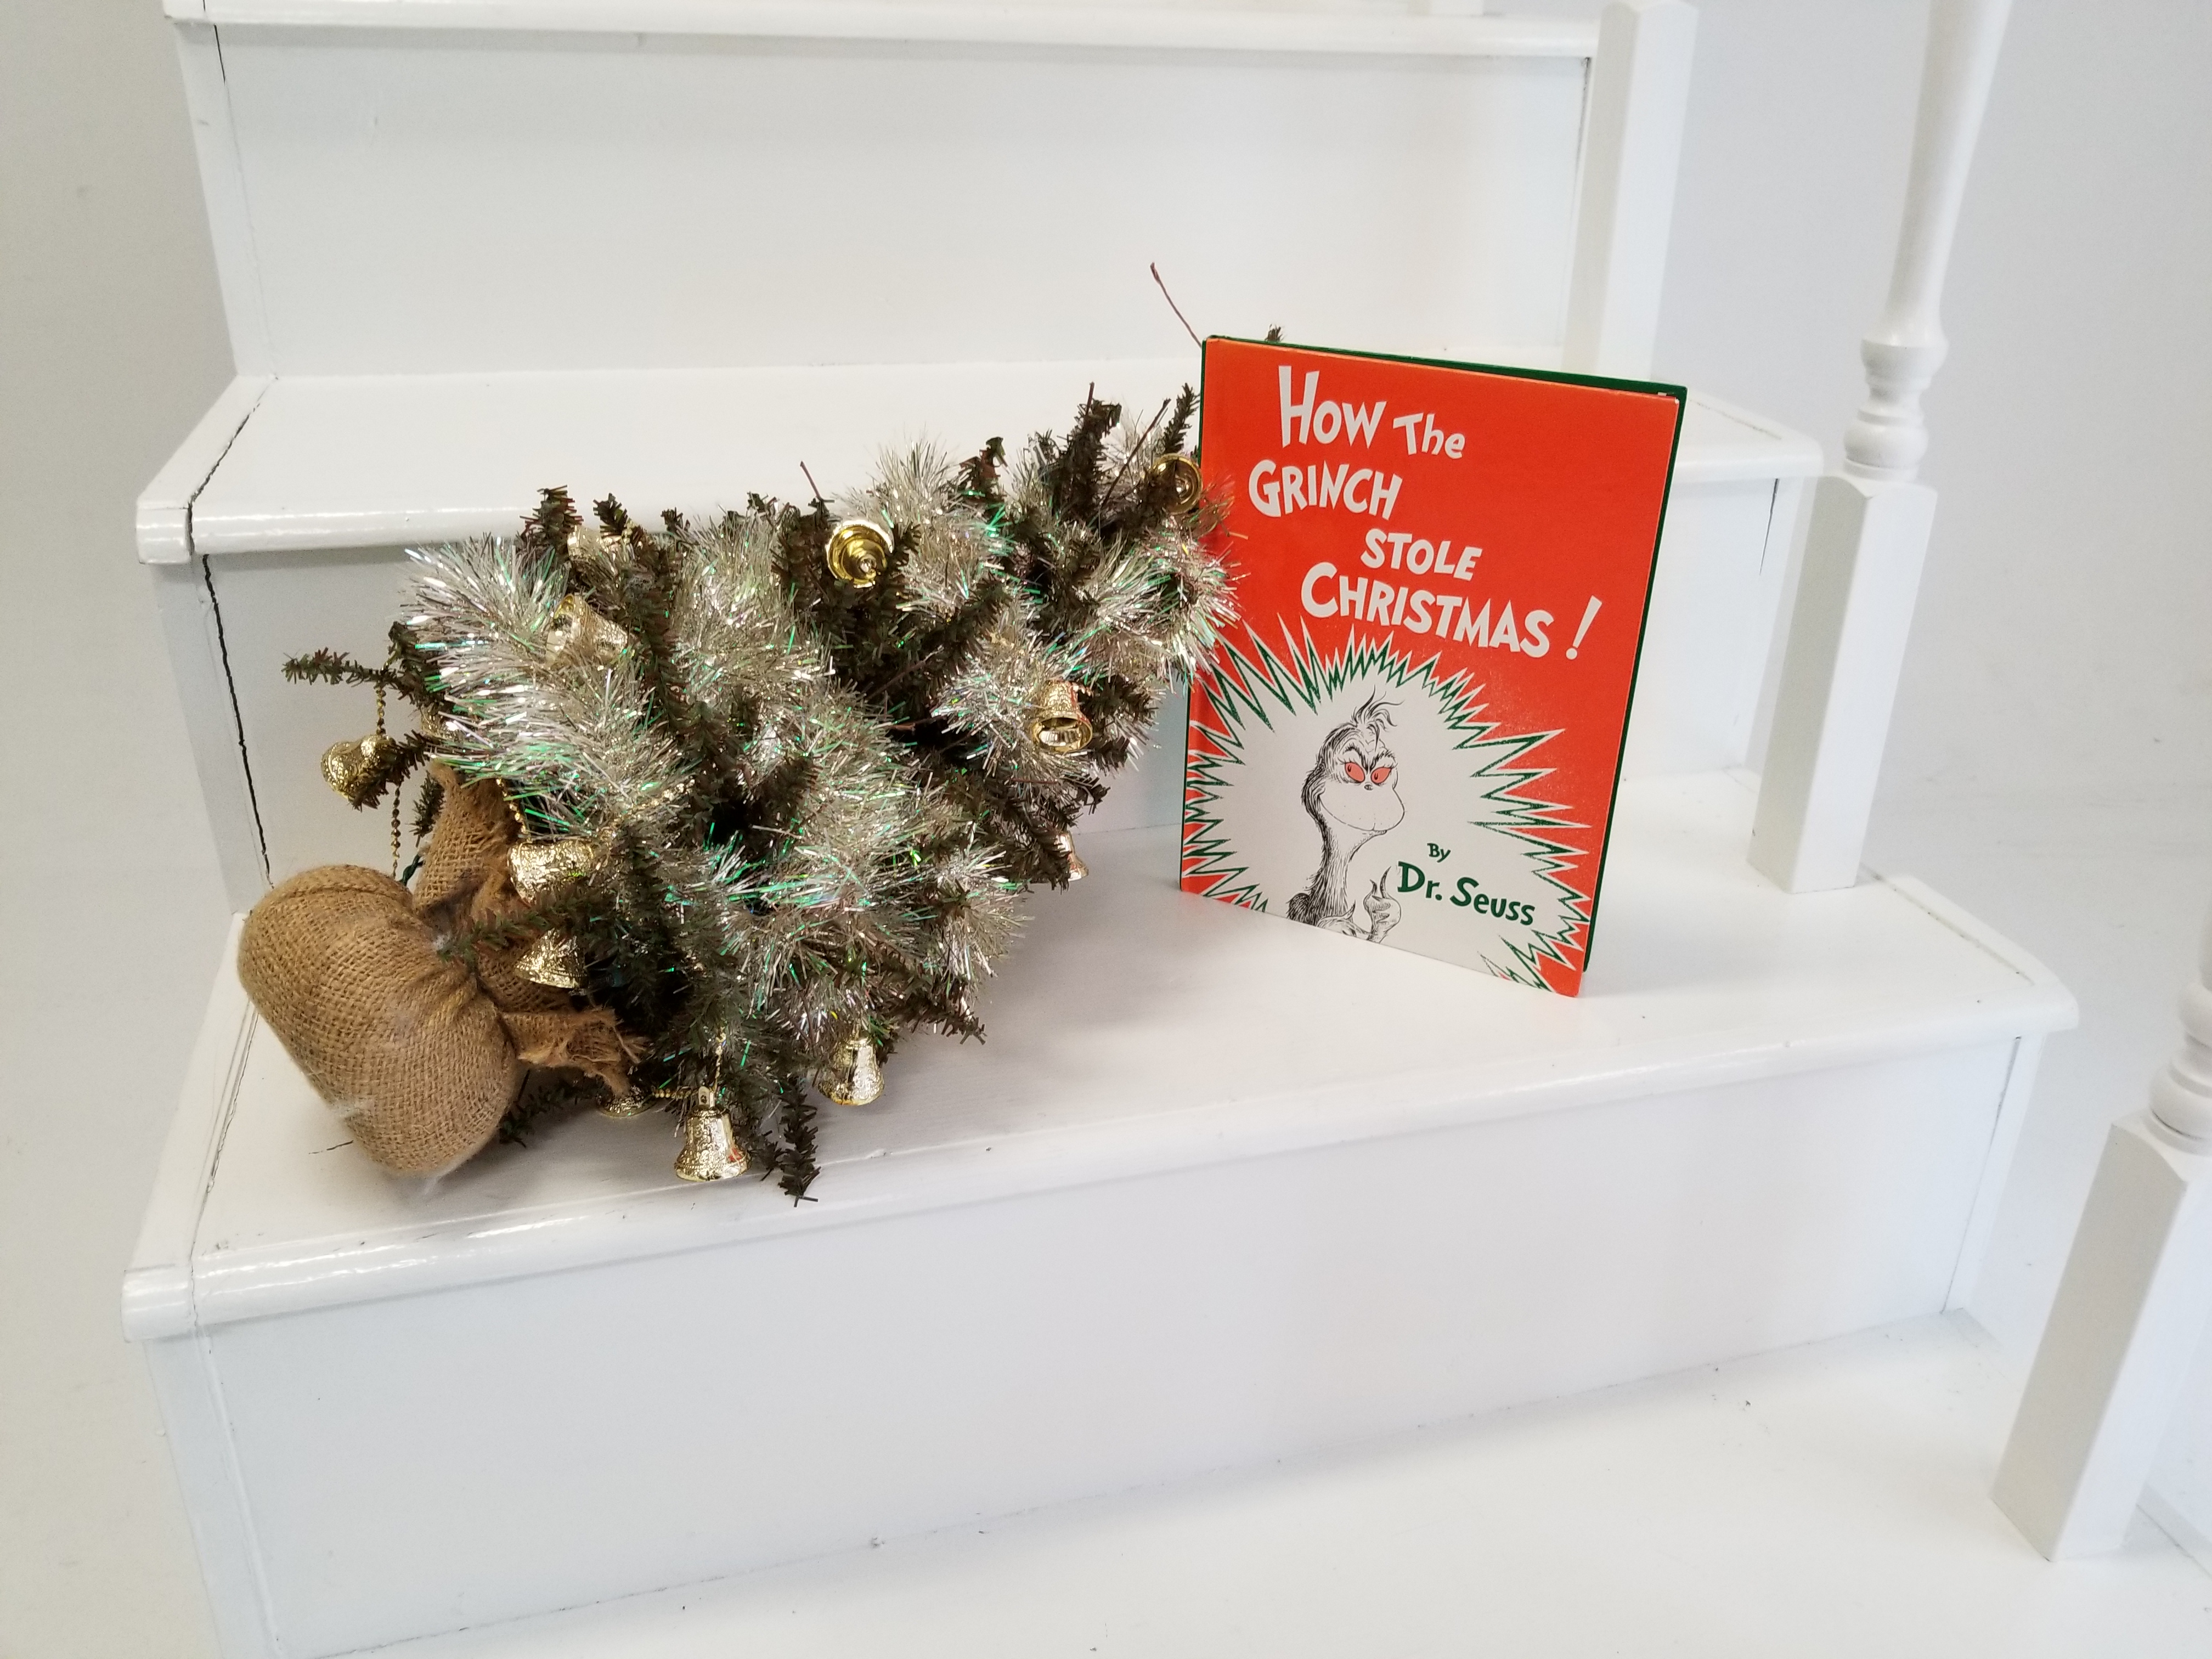 Grinch book and Christmas tree